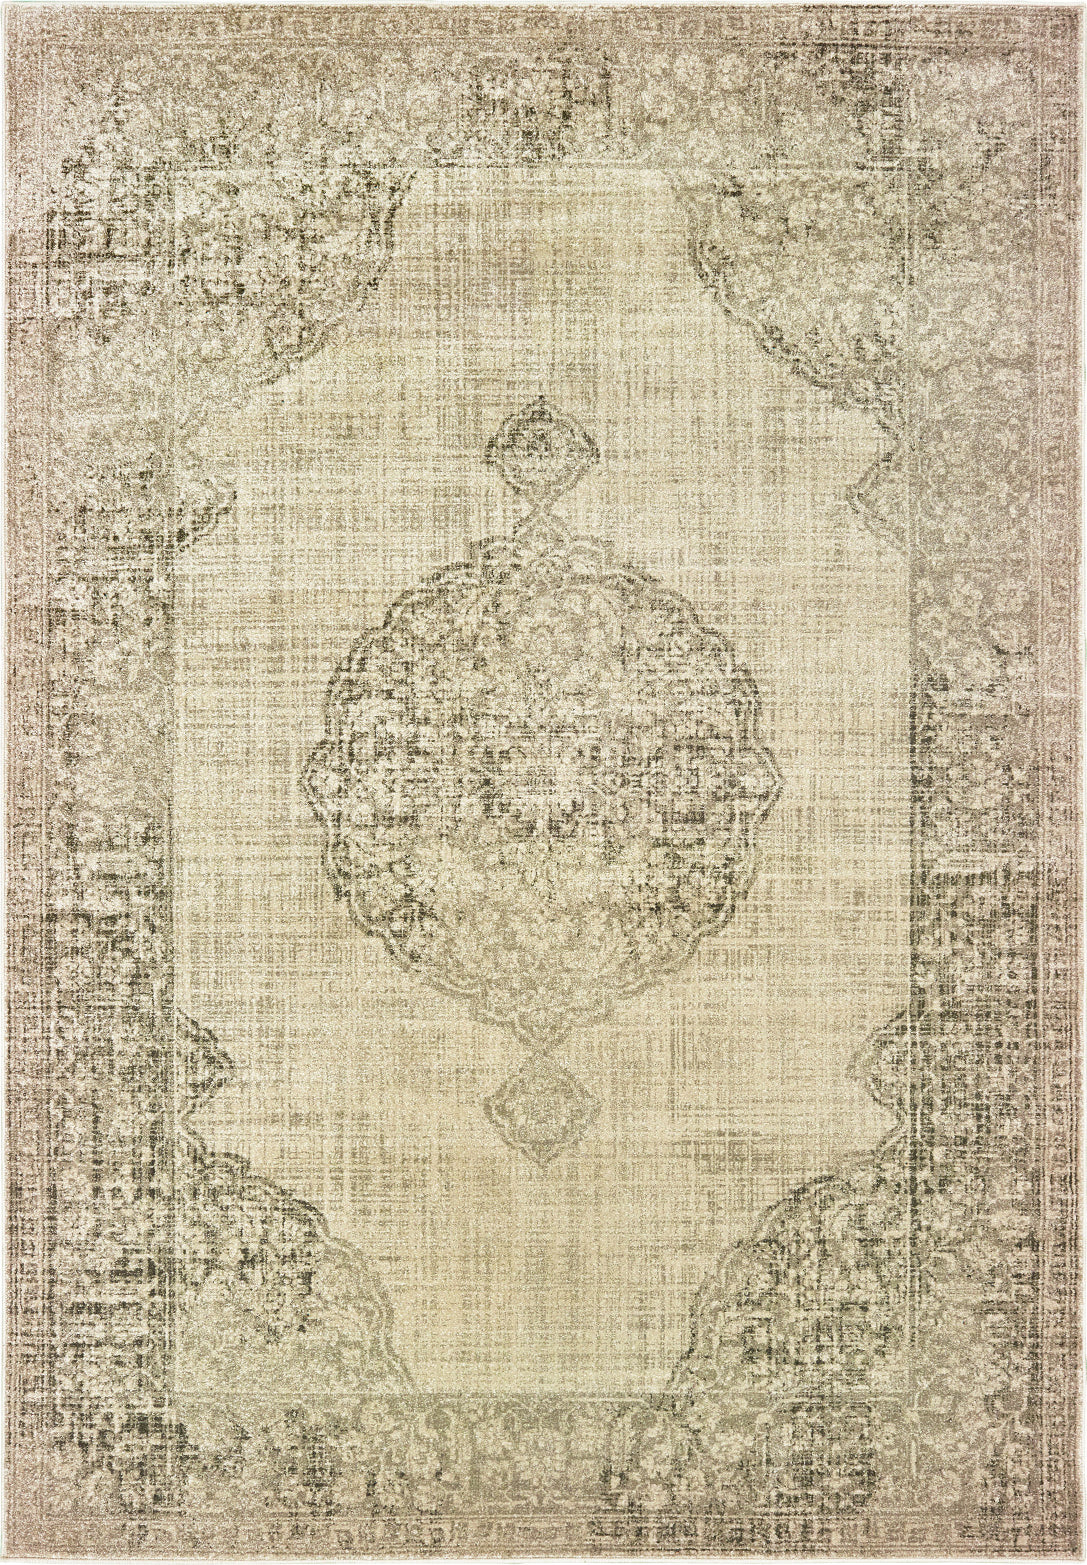 Oriental Weavers Raleigh 099D5 Ivory Grey Area Rug main image Featured